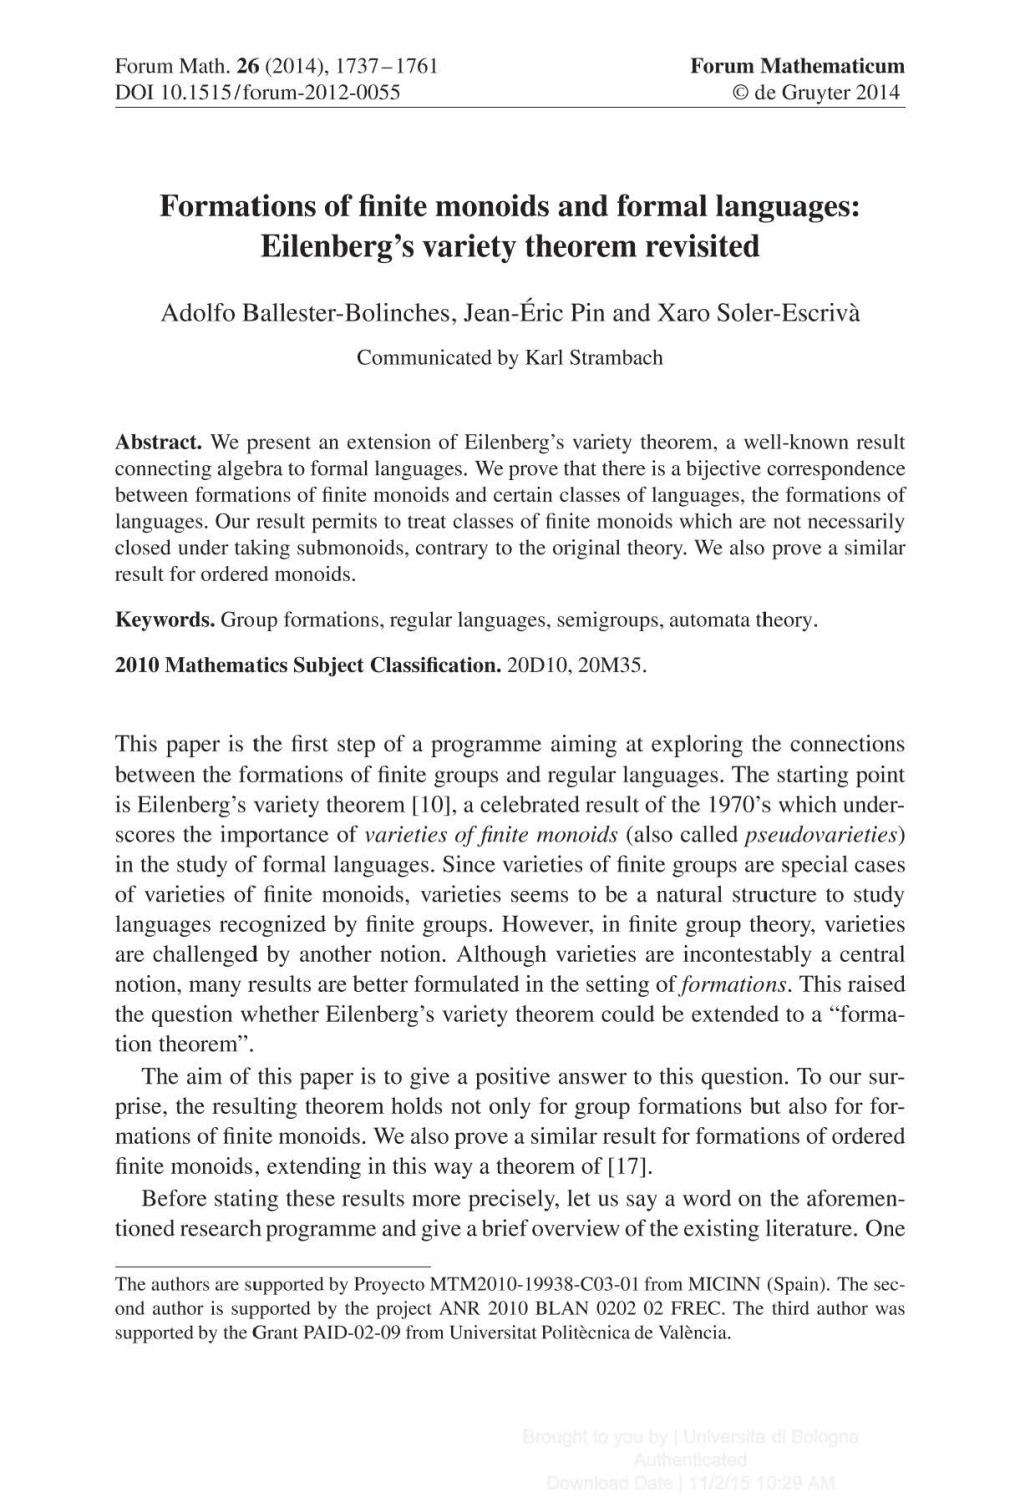 Formations of Finite Monoids and Formal Languages: Eilenberg's Variety Theorem Revisited